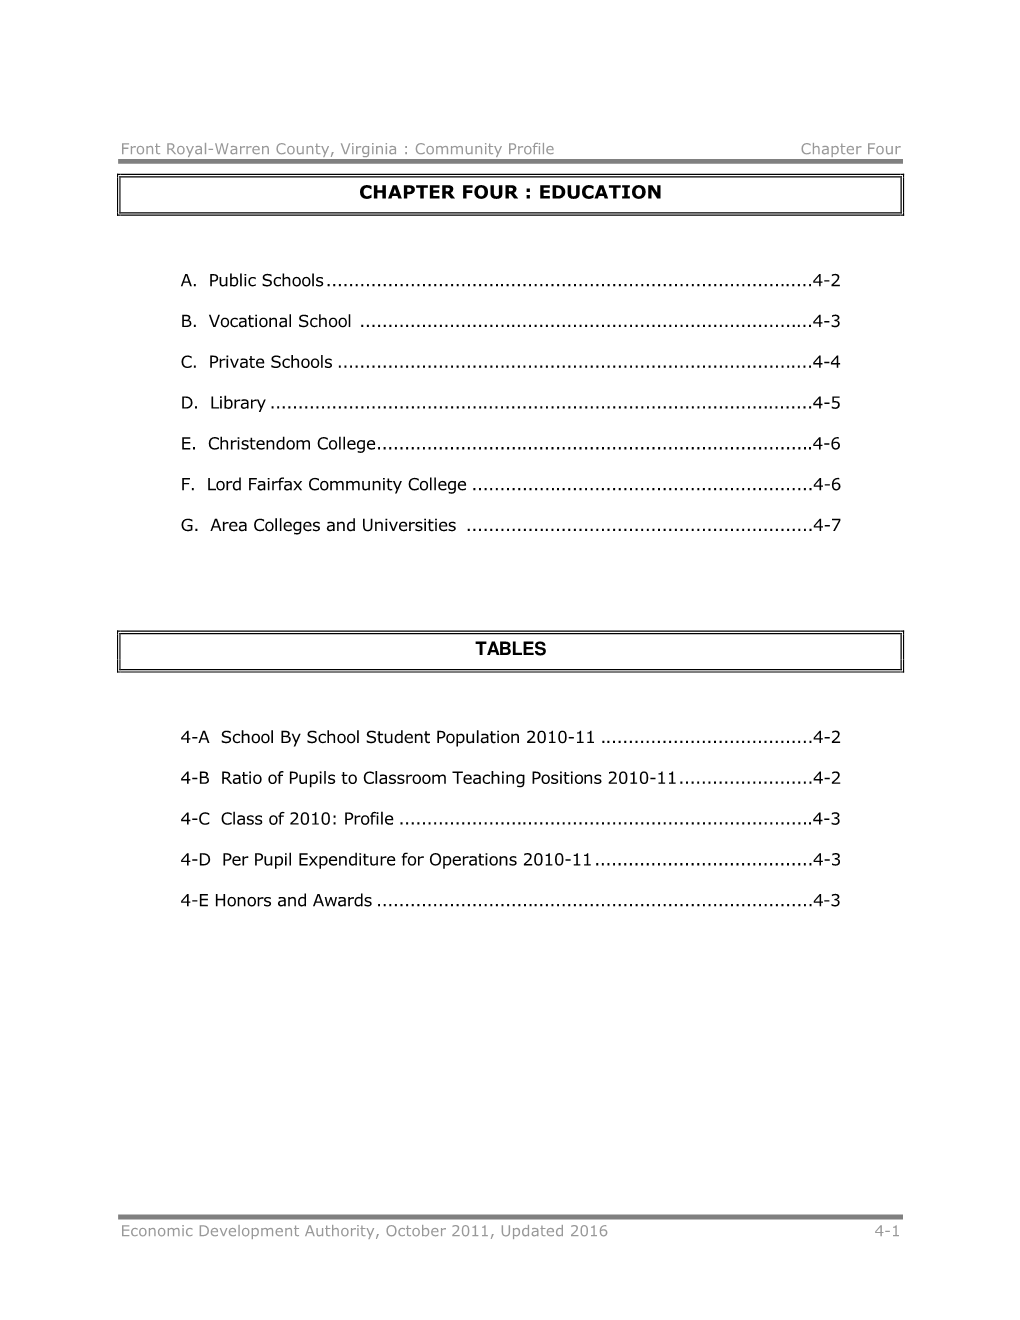 Chapter Four : Education Tables